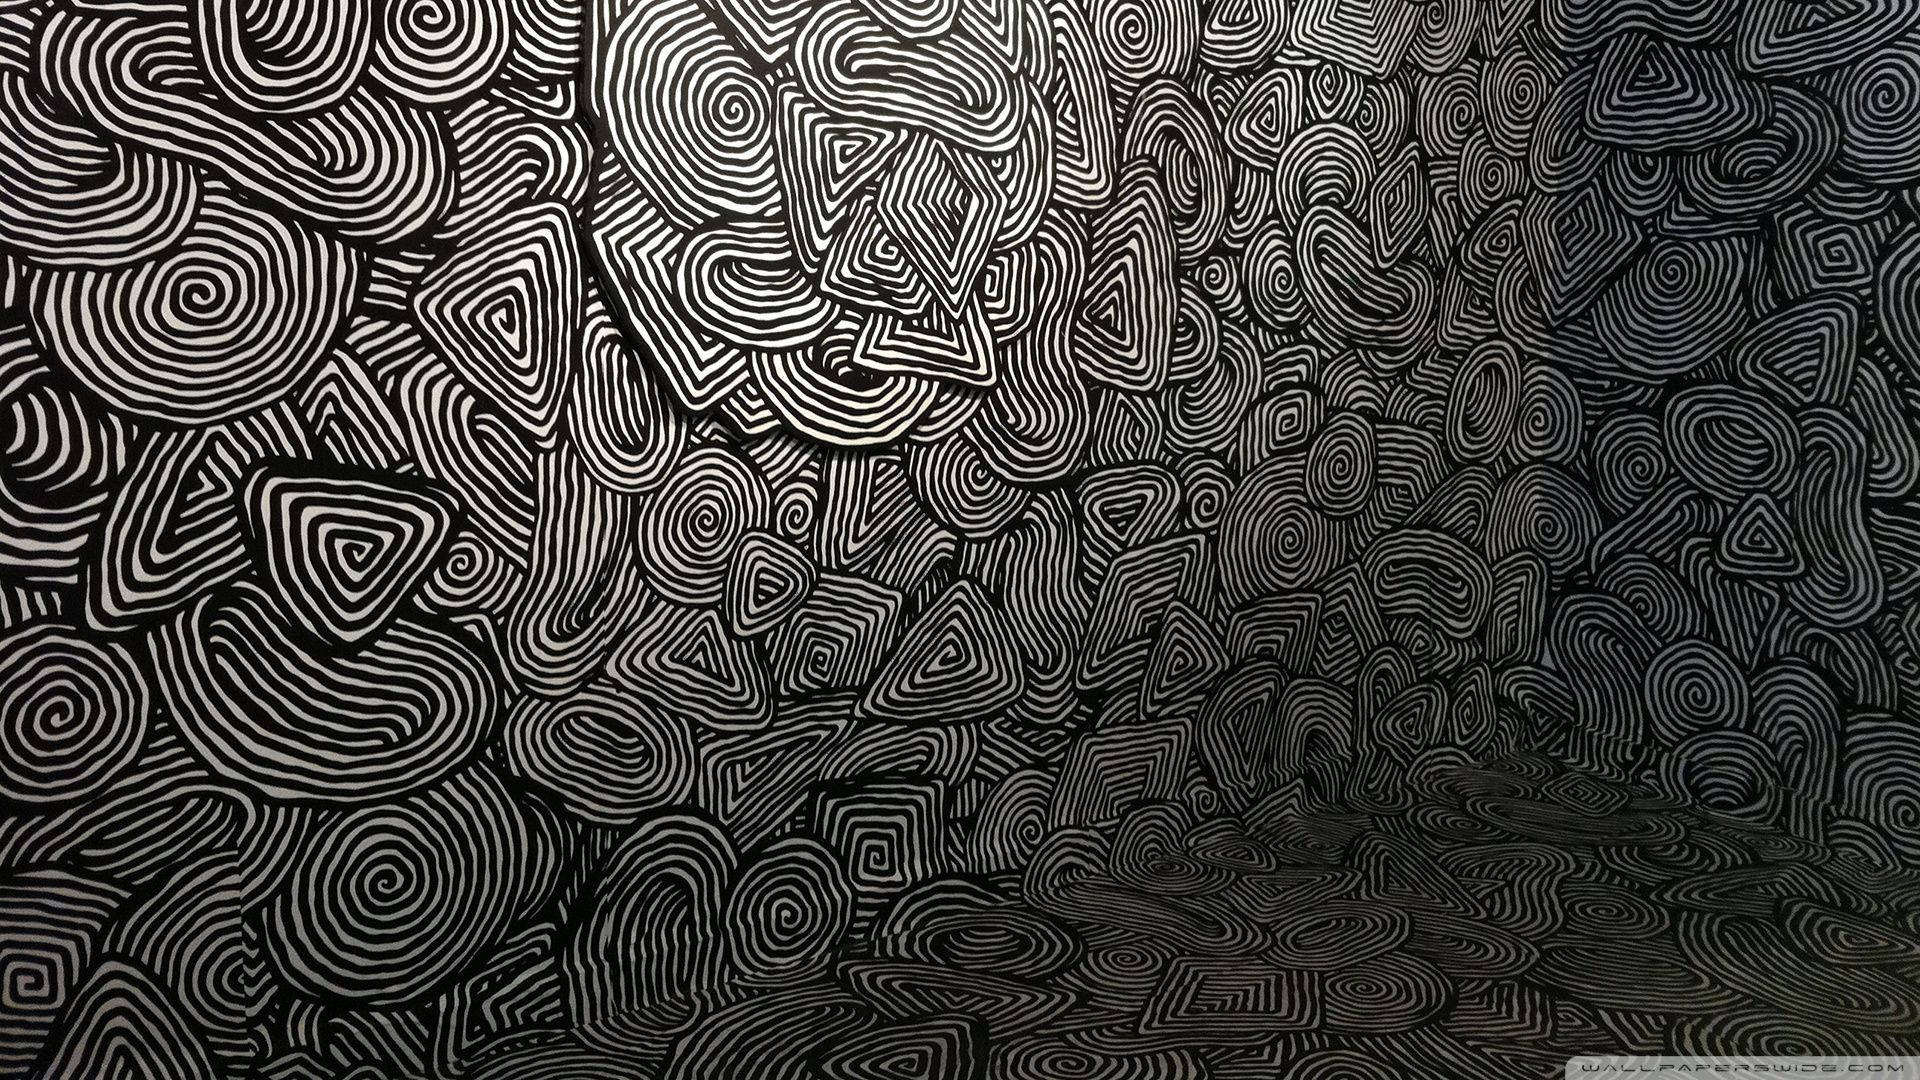 Black and white spiral pattern psychedelic wallpaper art.